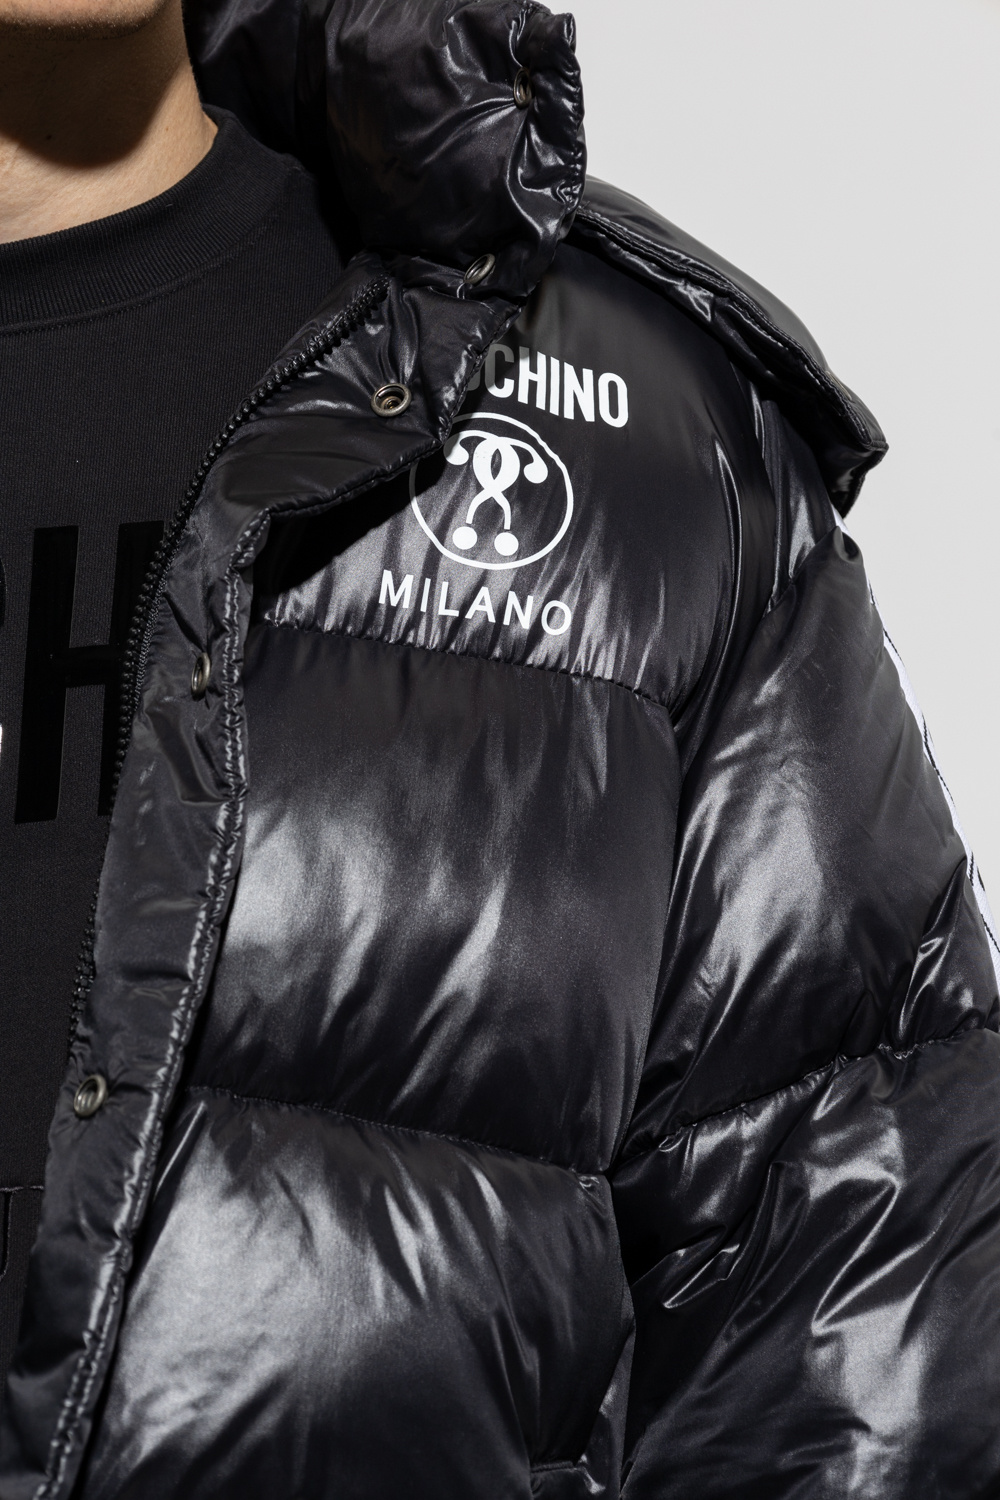 Moschino moncler cotton jersey and down jacket